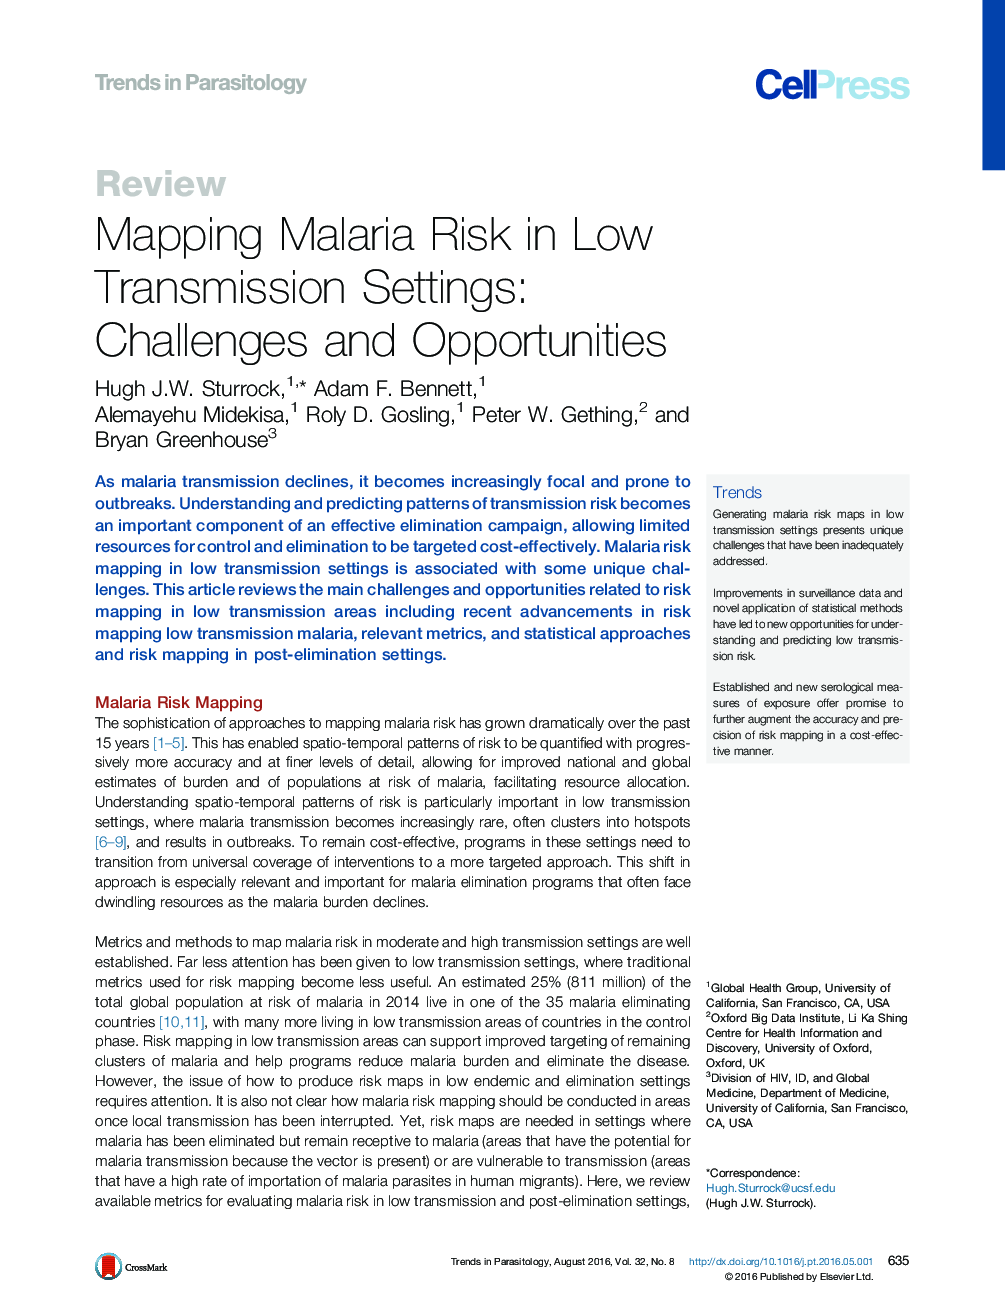 Mapping Malaria Risk in Low Transmission Settings: Challenges and Opportunities